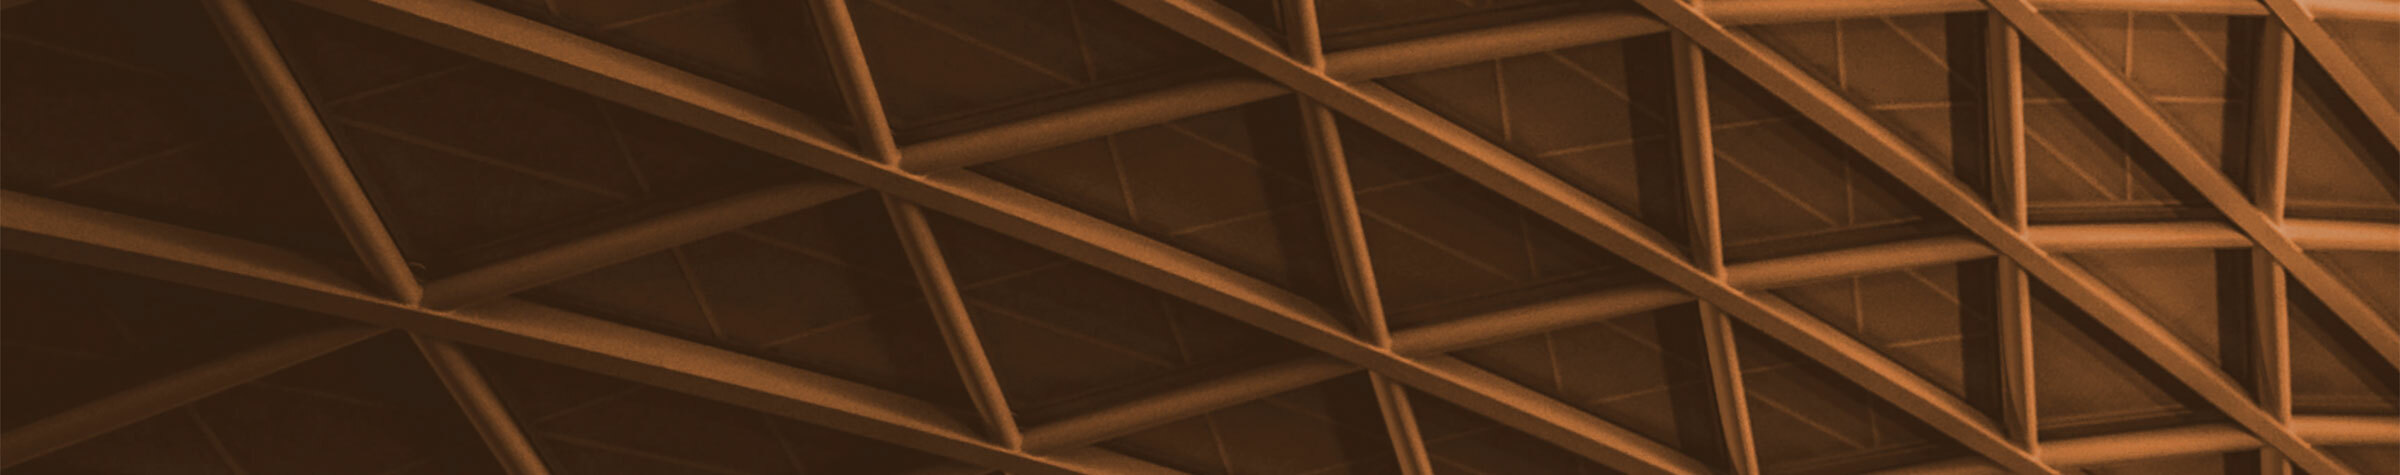 Dark ceiling with a geometric pattern